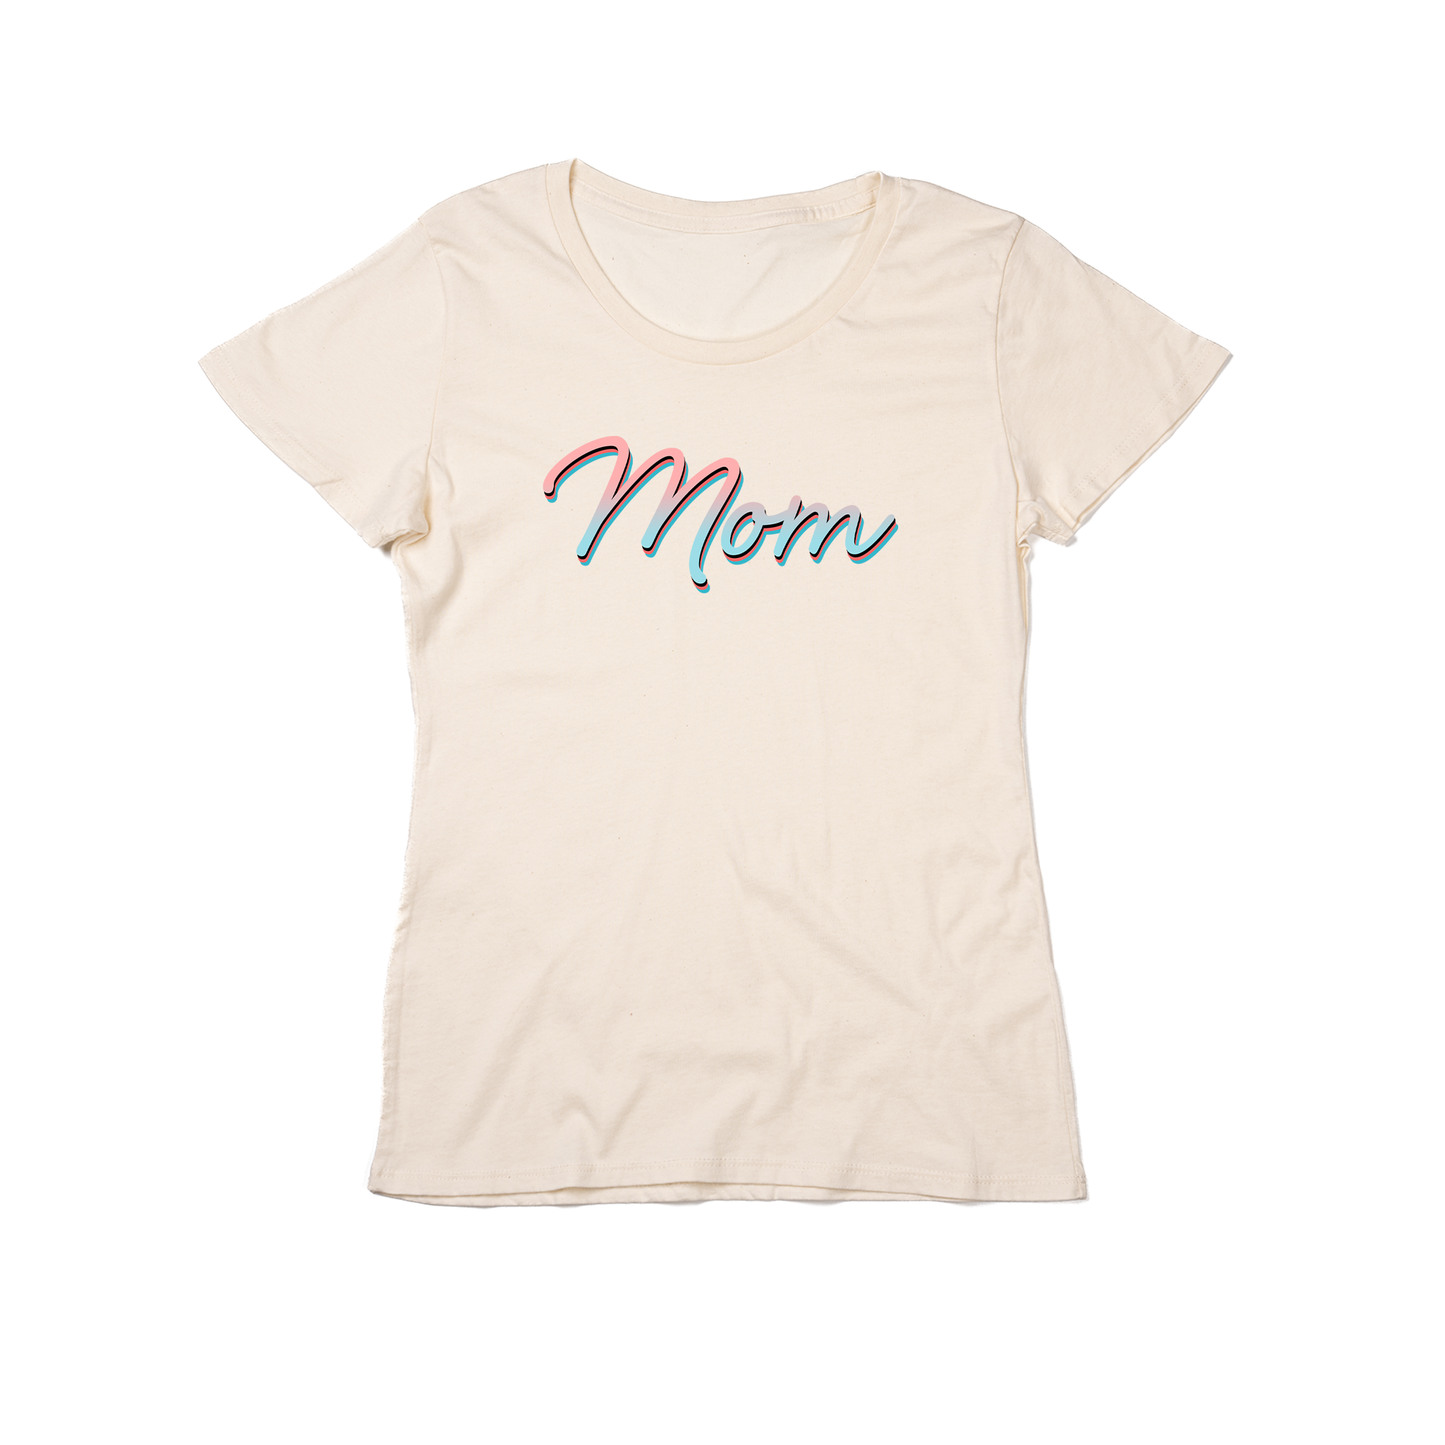 Mom (90's Inspired, Pink/Blue) - Women's Fitted Tee (Natural)